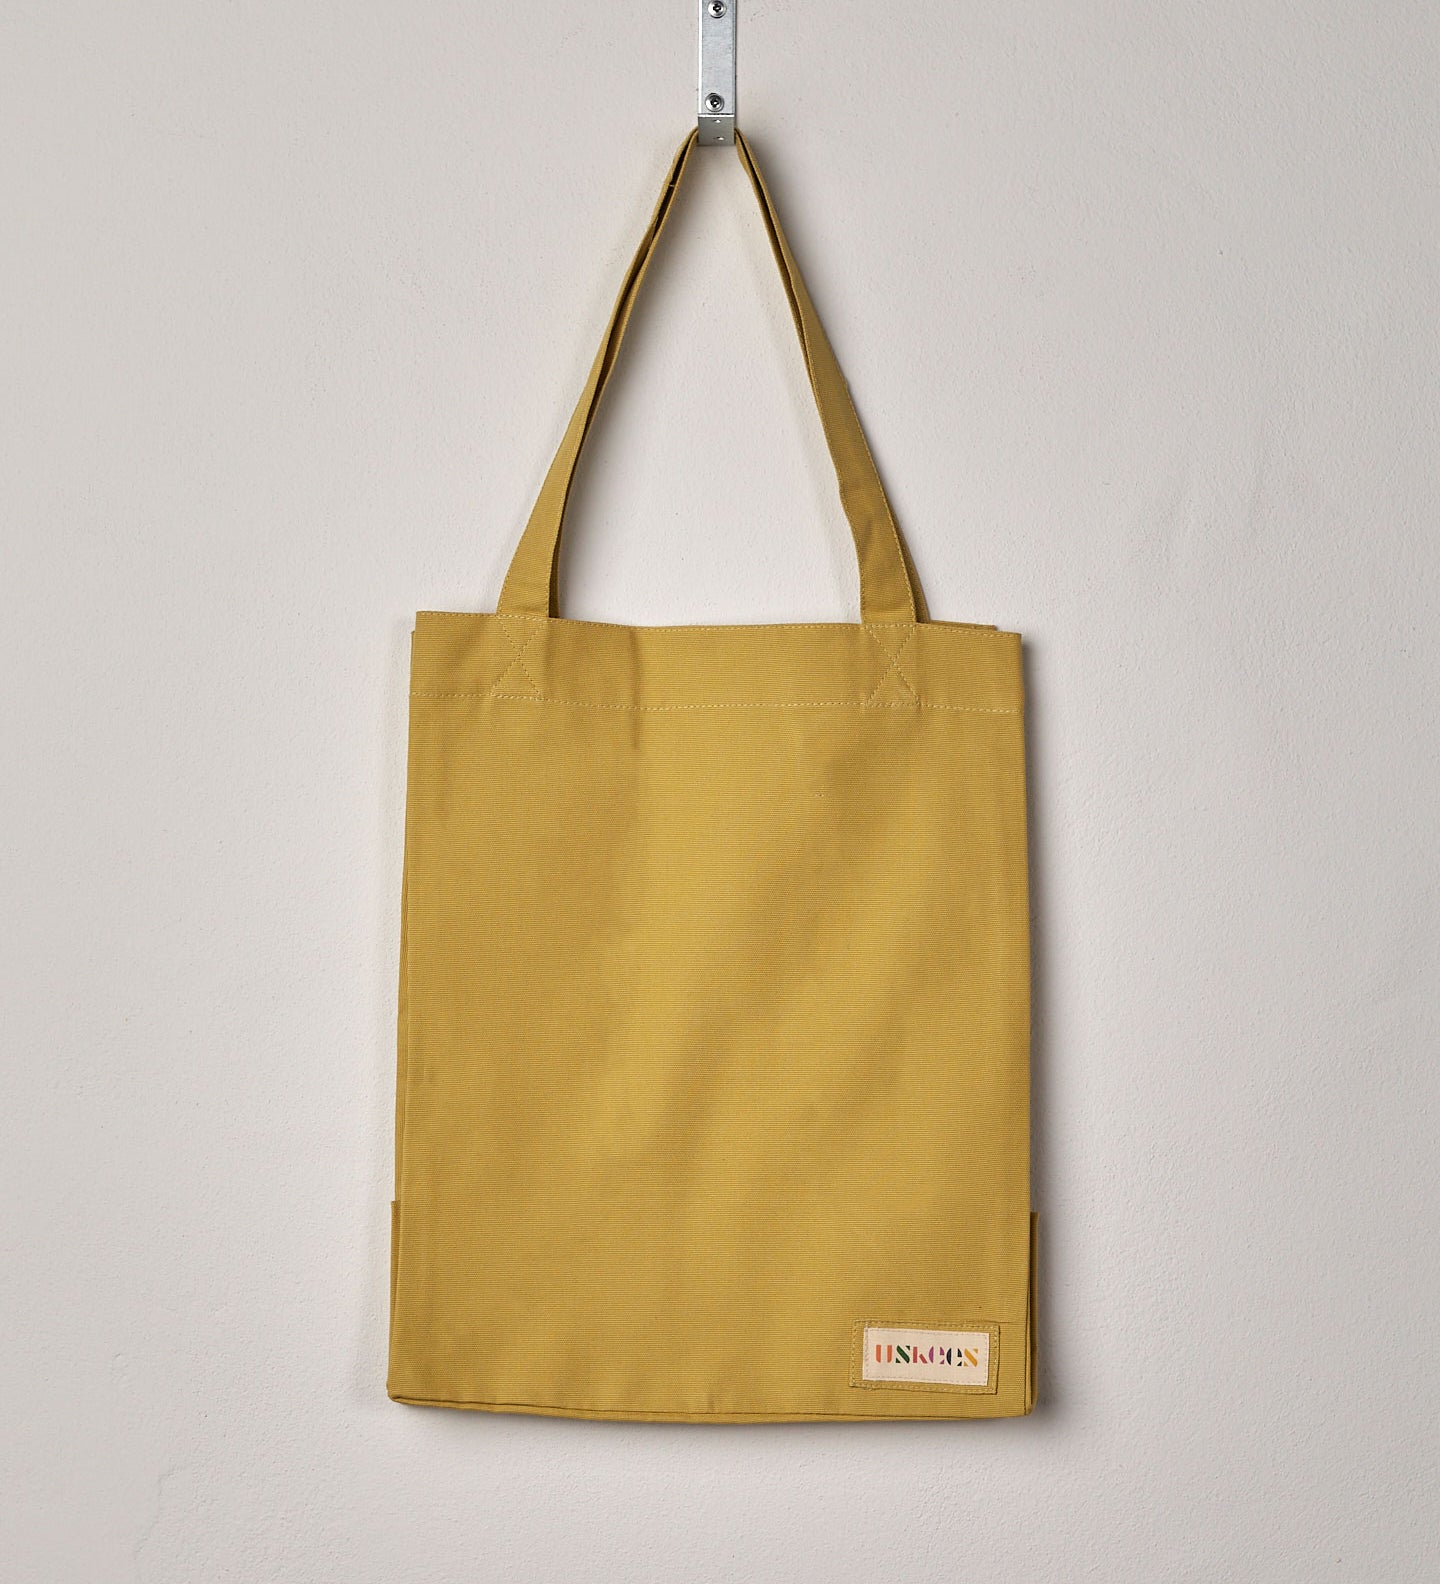 Full front hanging shot of Uskees #4002 small citronella-yellow tote bag, showing double handles and Uskees woven logo.